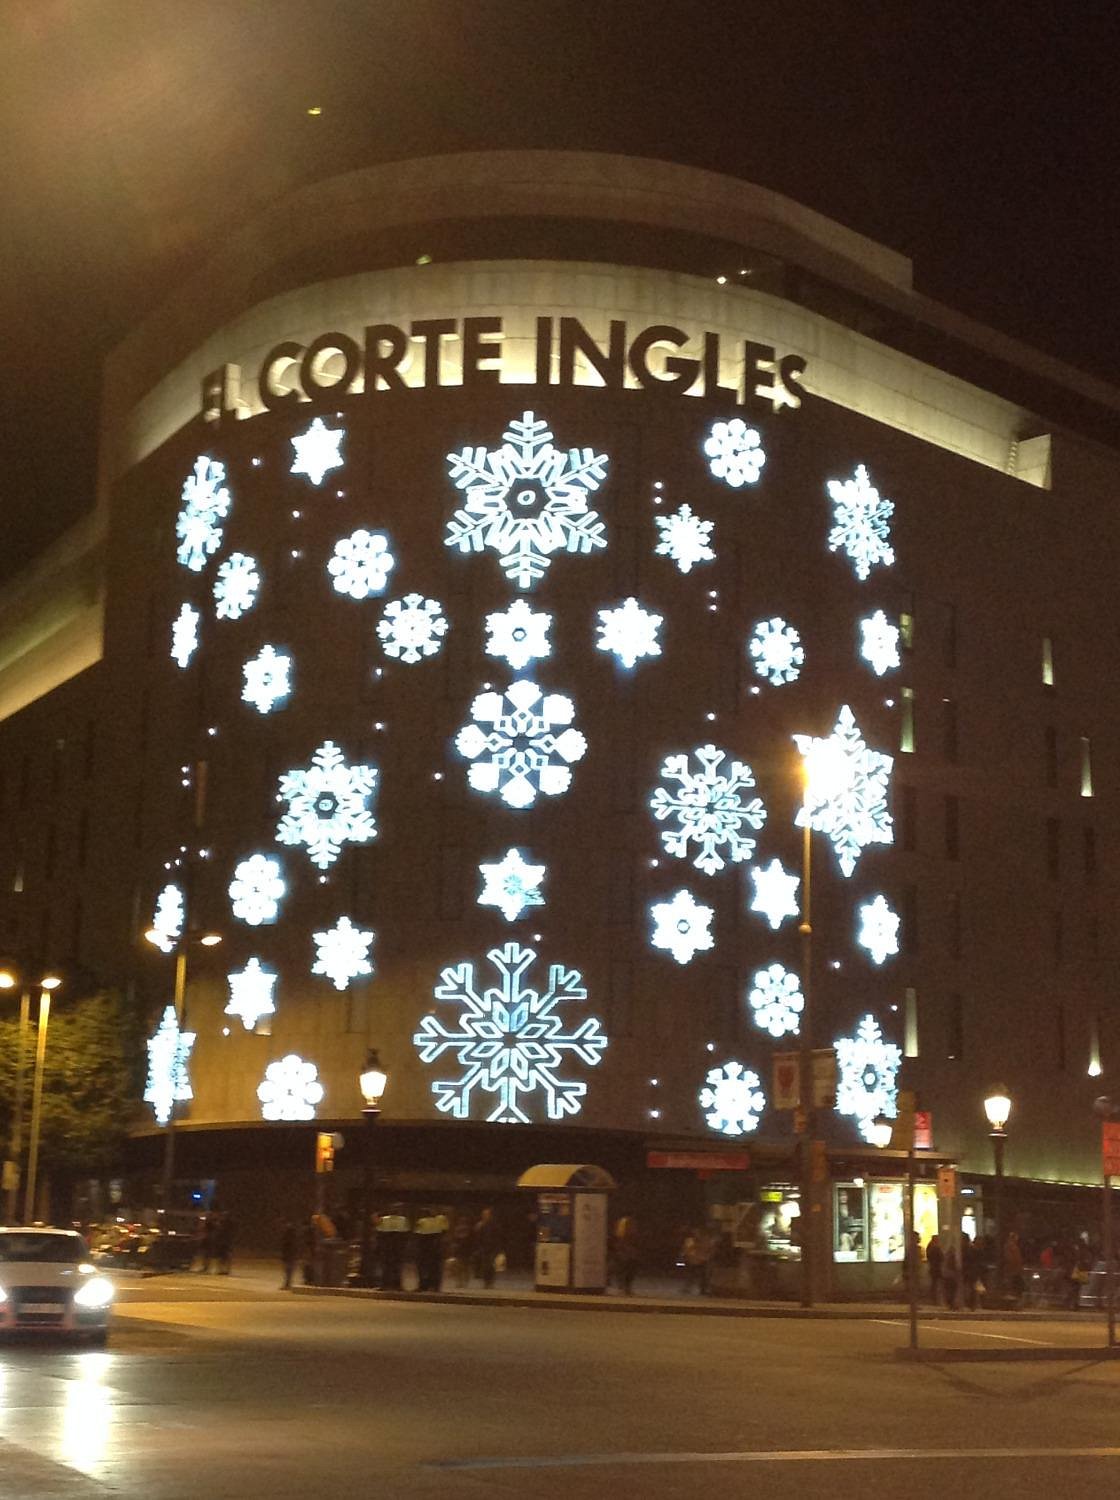 El Corte Inglés is one of the best places to shop in Lisbon